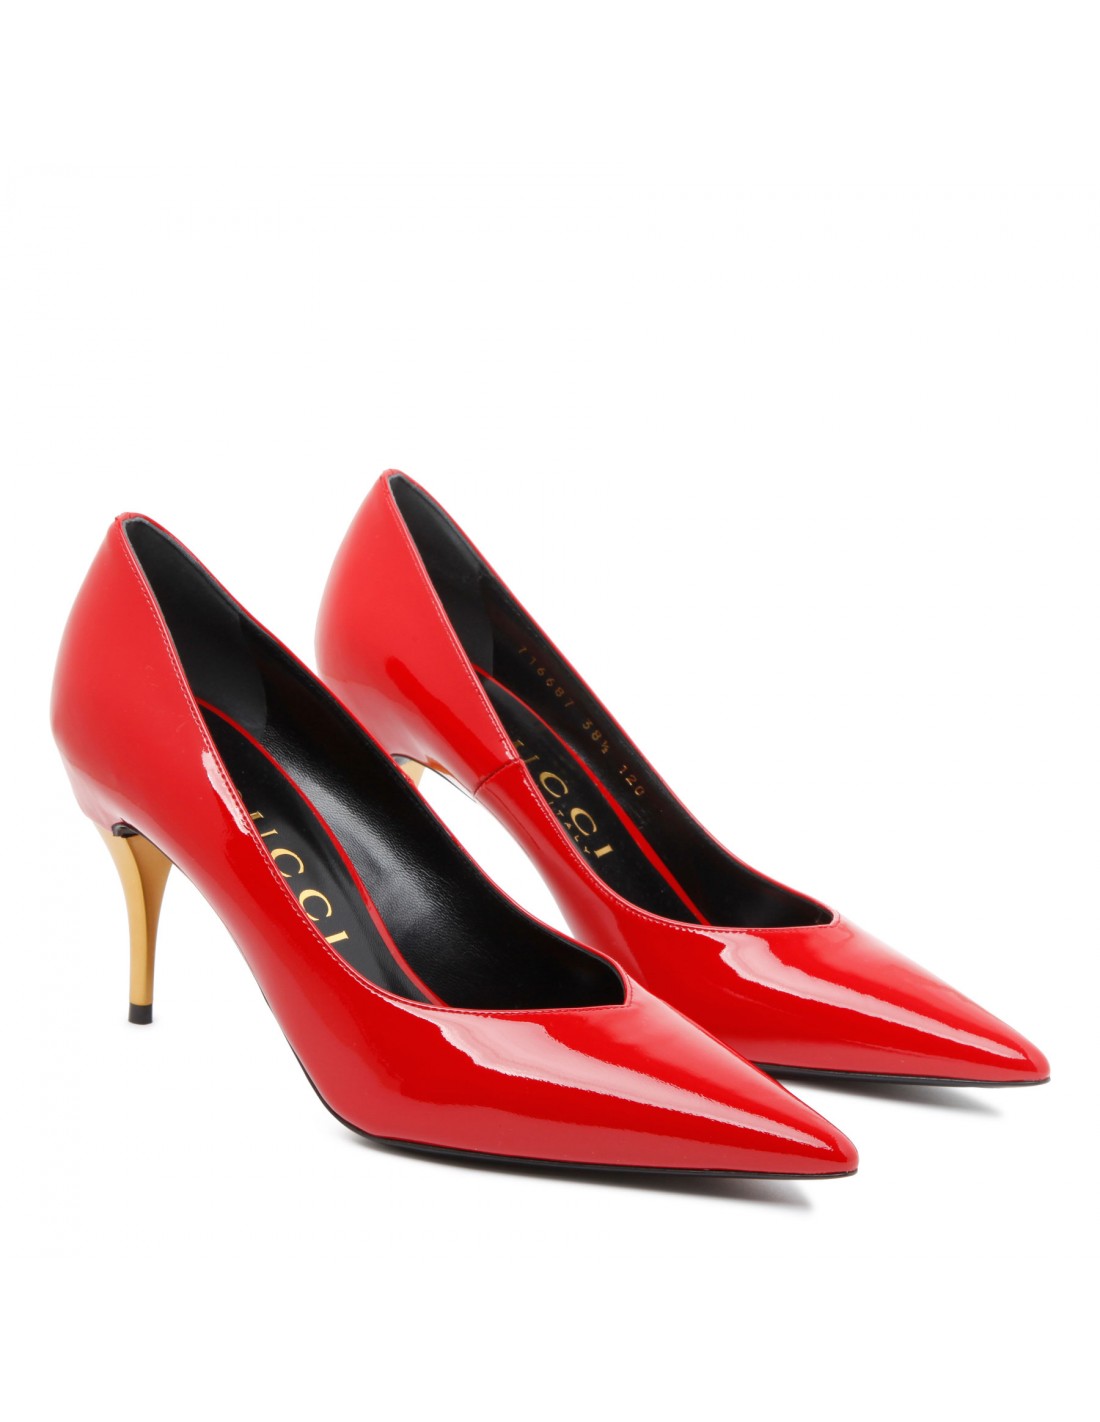 Red patent pumps